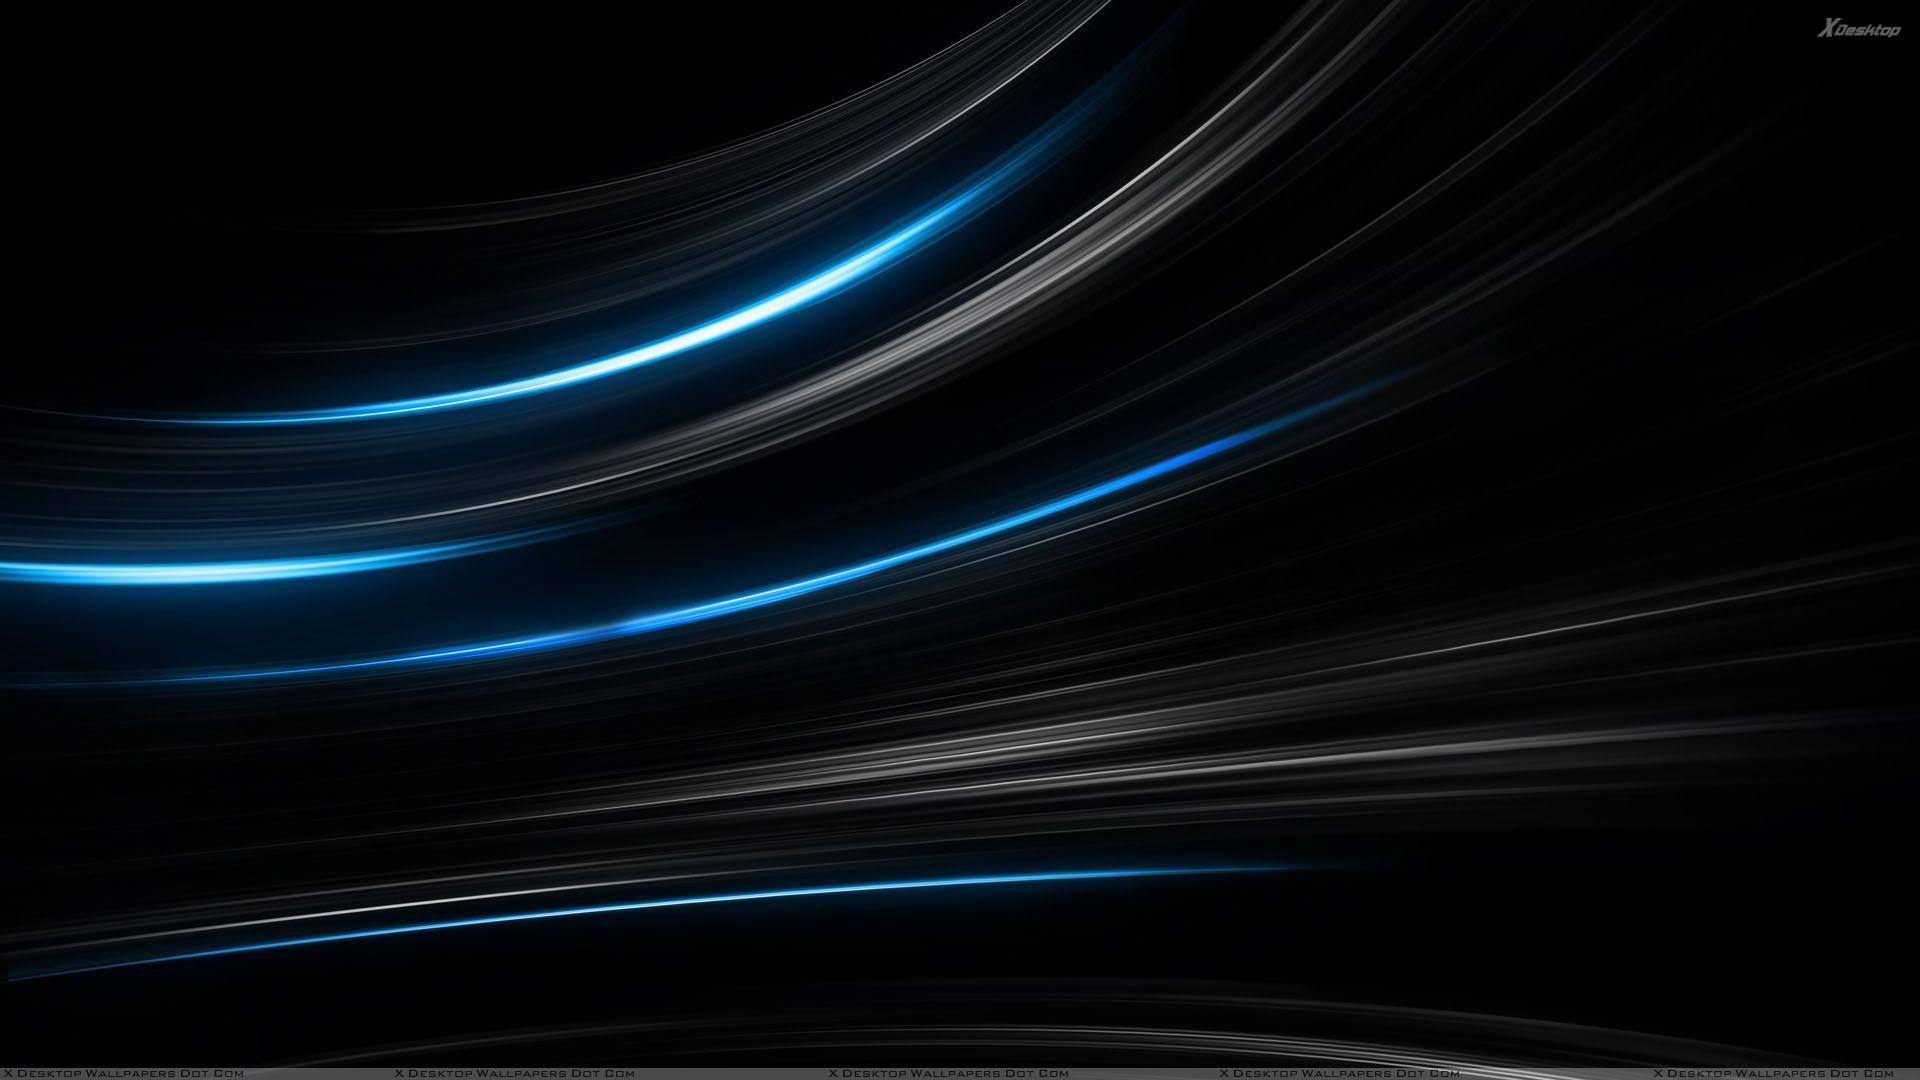 10 Incomparable blue & black desktop wallpaper You Can Save It At No ...